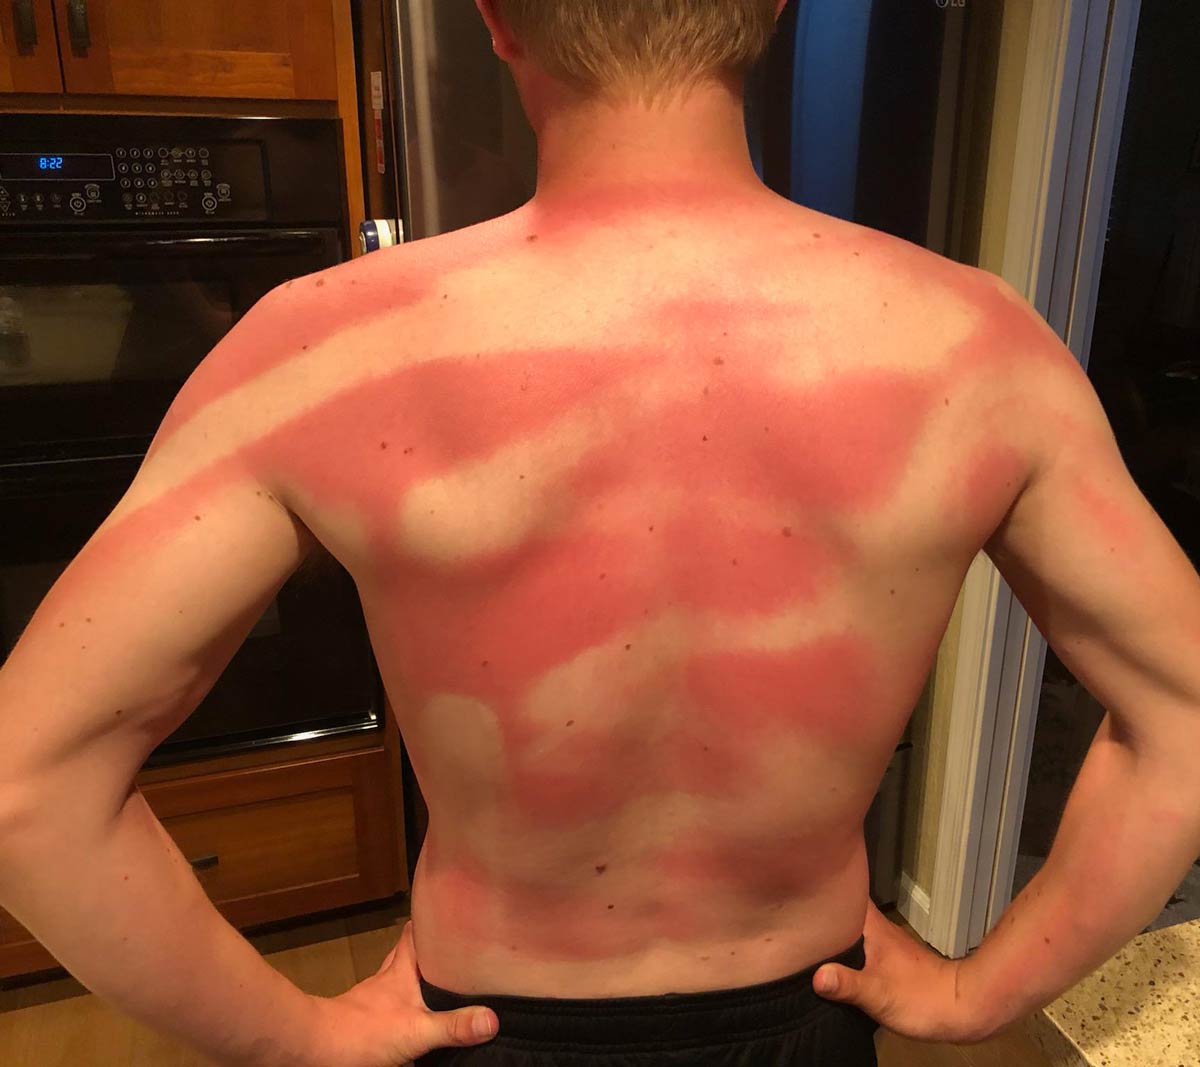 My wife put sunscreen on my back at the beach today.. Twice!